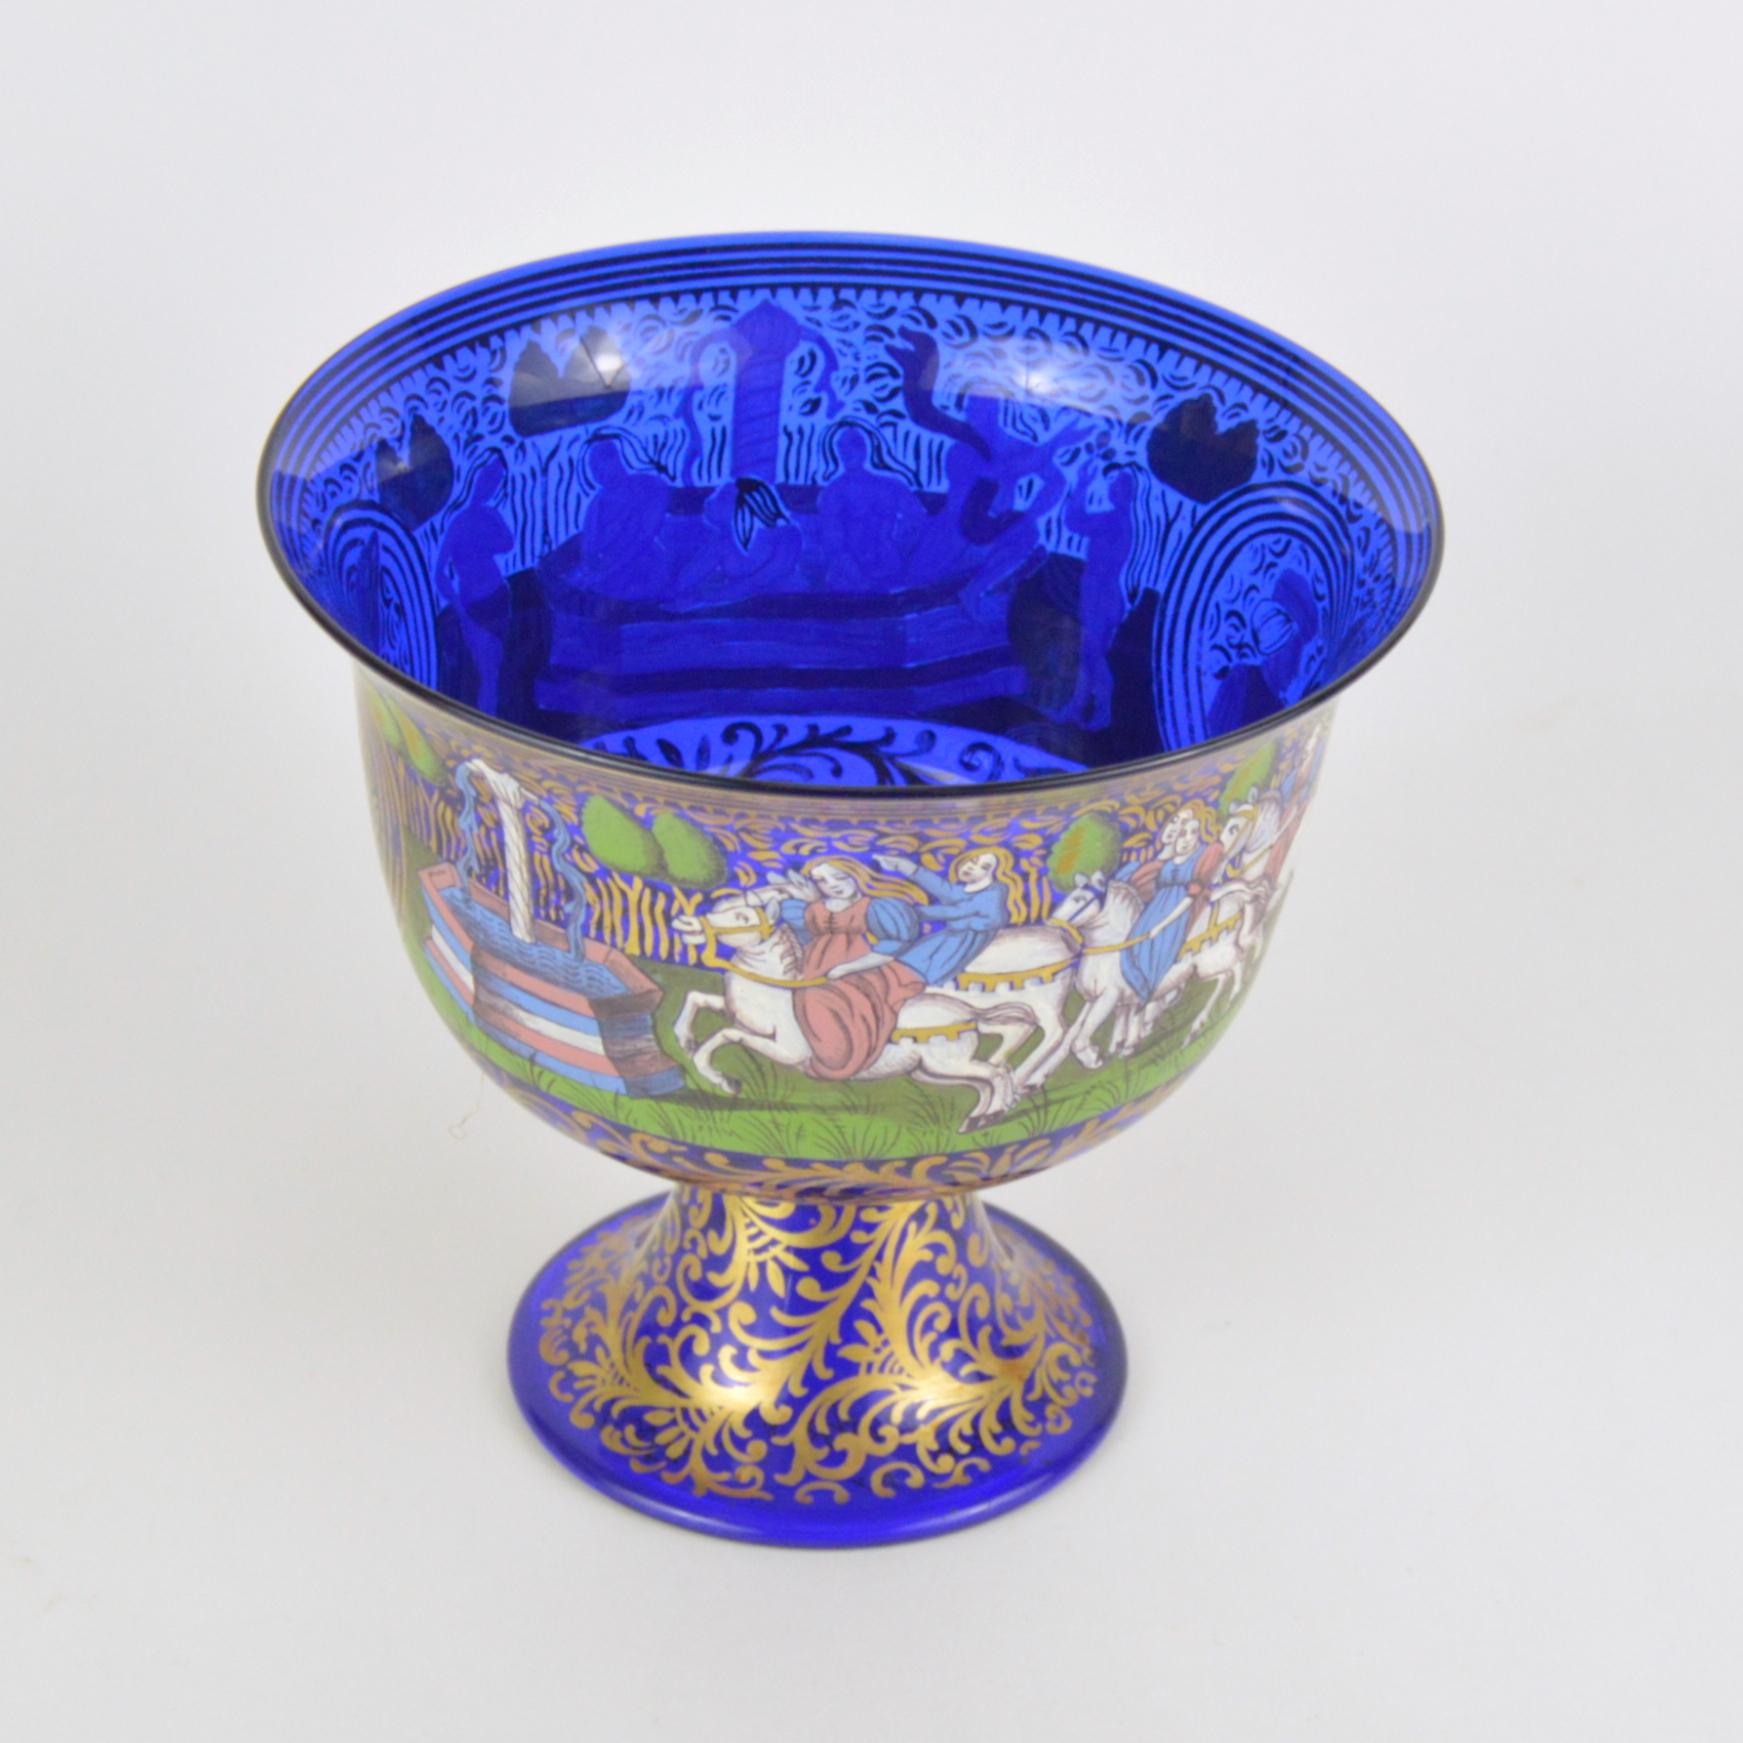 Wedding cobalt glass cup with enameled decoration. Designed by Albertini Spezzamonte, Murano (Italy), 1950s-1960s. It is an original copy made by Murano artists for the famous wedding cup produced in 1470 and exhibited at the Glass Museum of Murano,